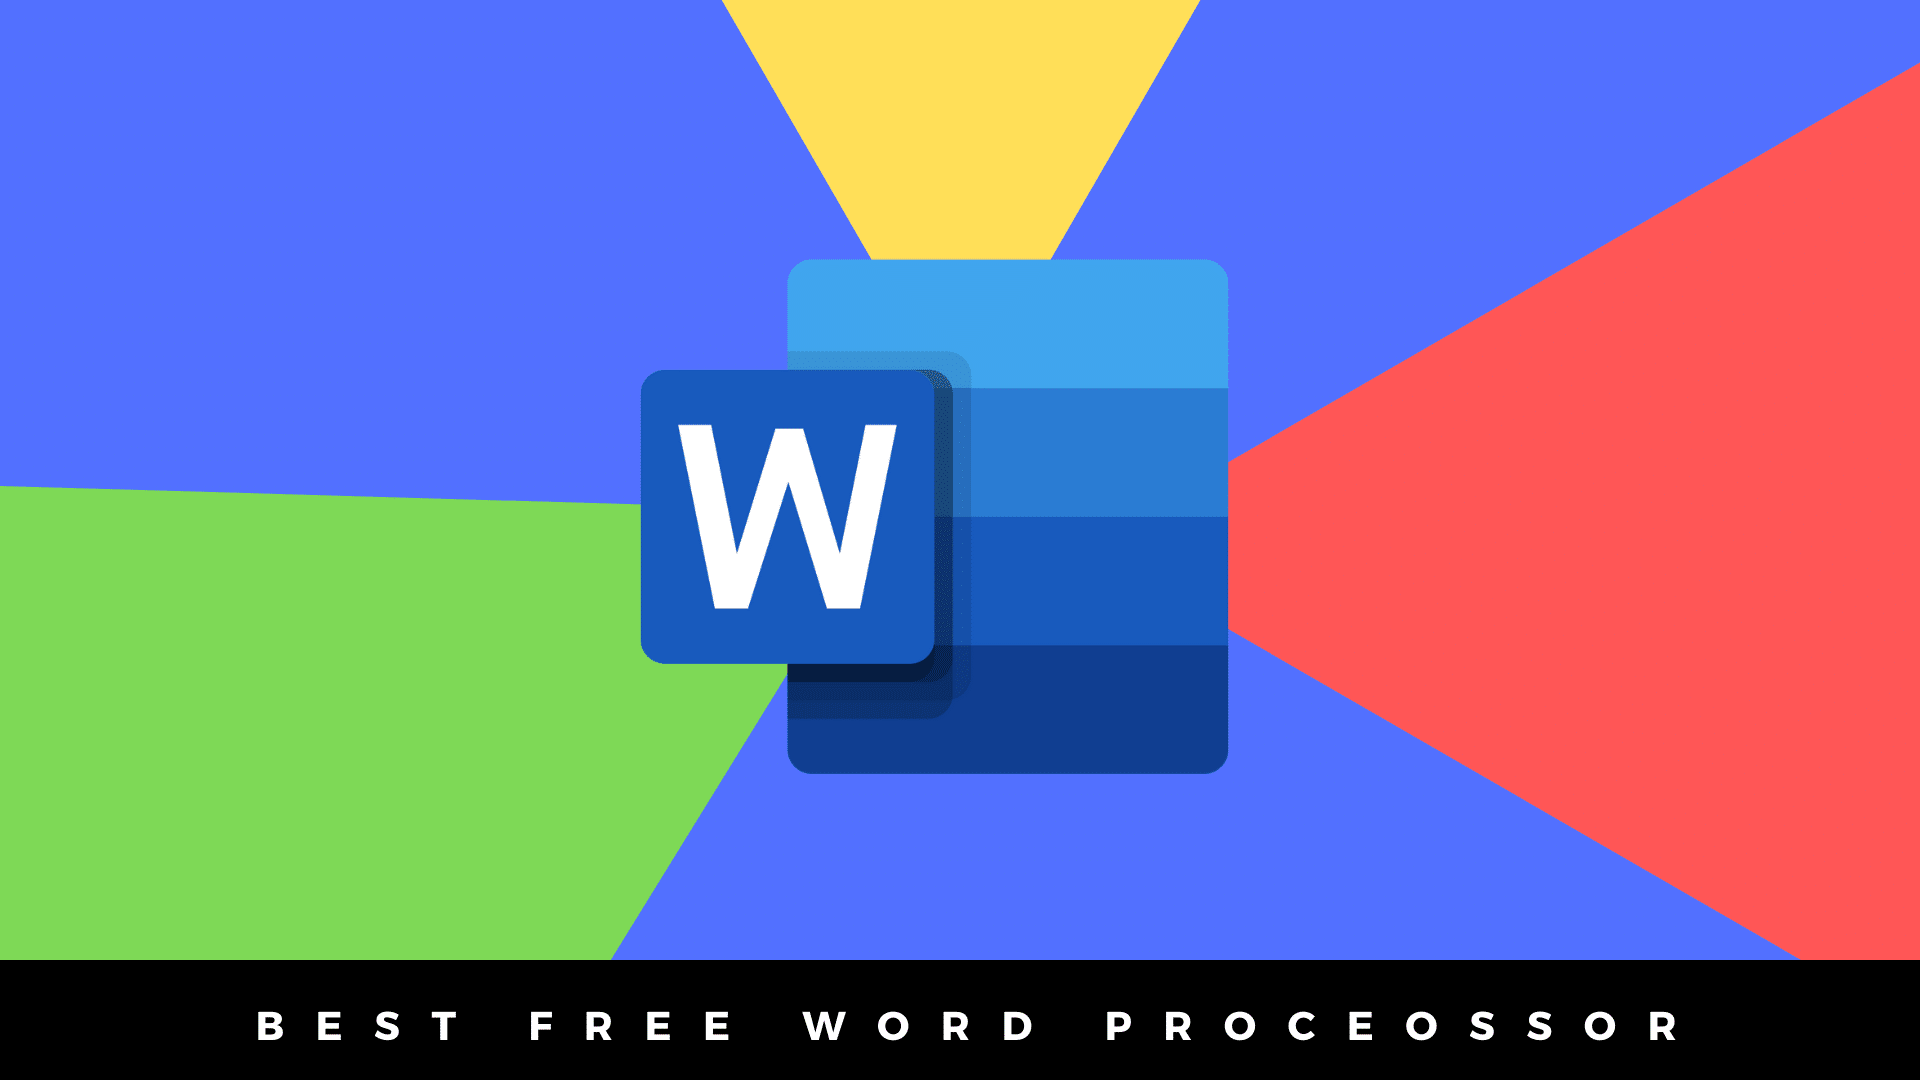 Free word processor for windows 10 download a temporary gift pdf free download